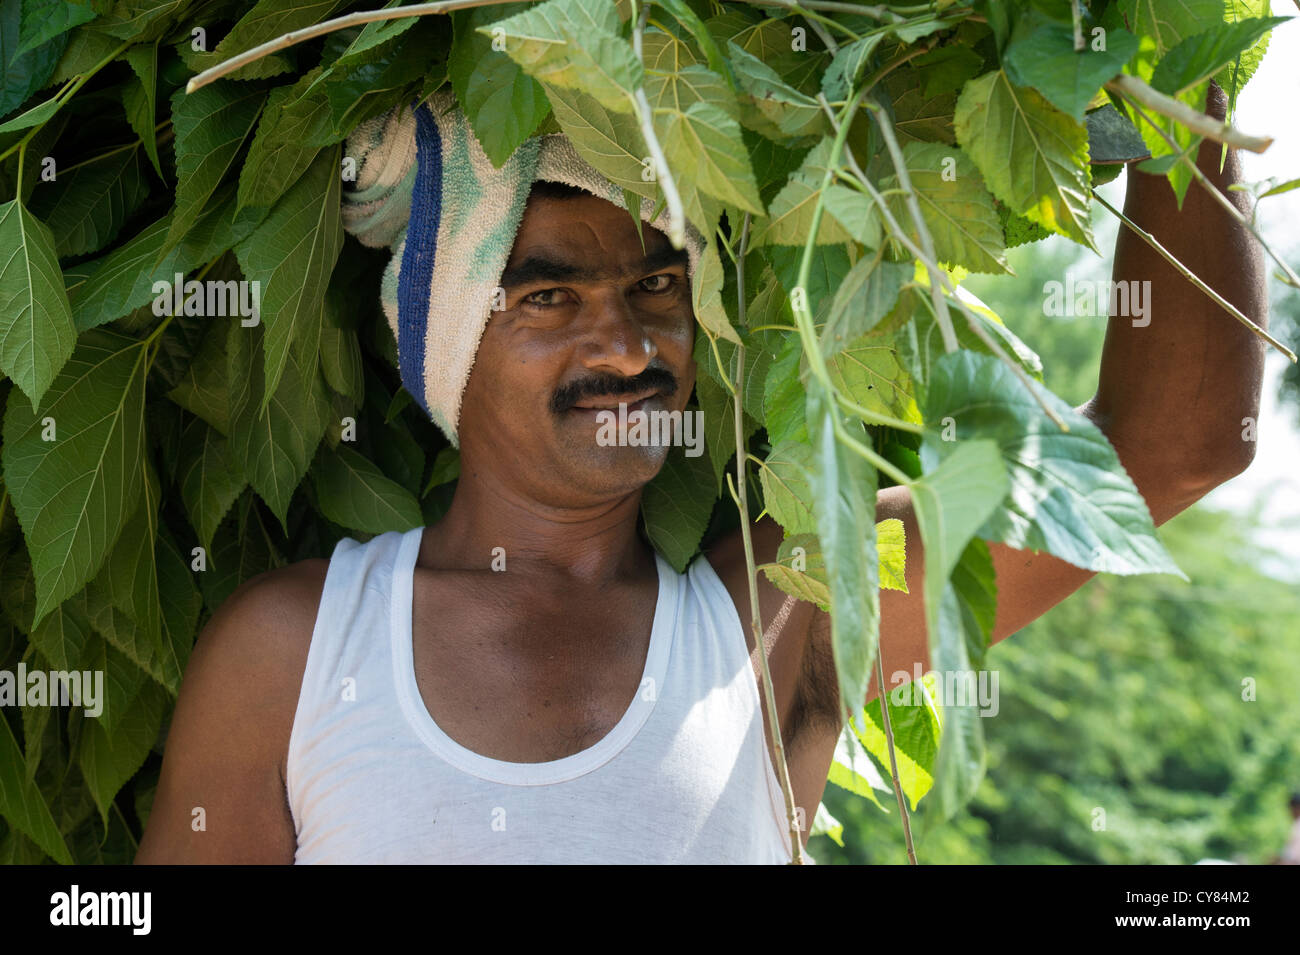 Indian silk farmer carrying mulberry branches and leaves on his head in a rural indian village. Andhra Pradesh, India Stock Photo